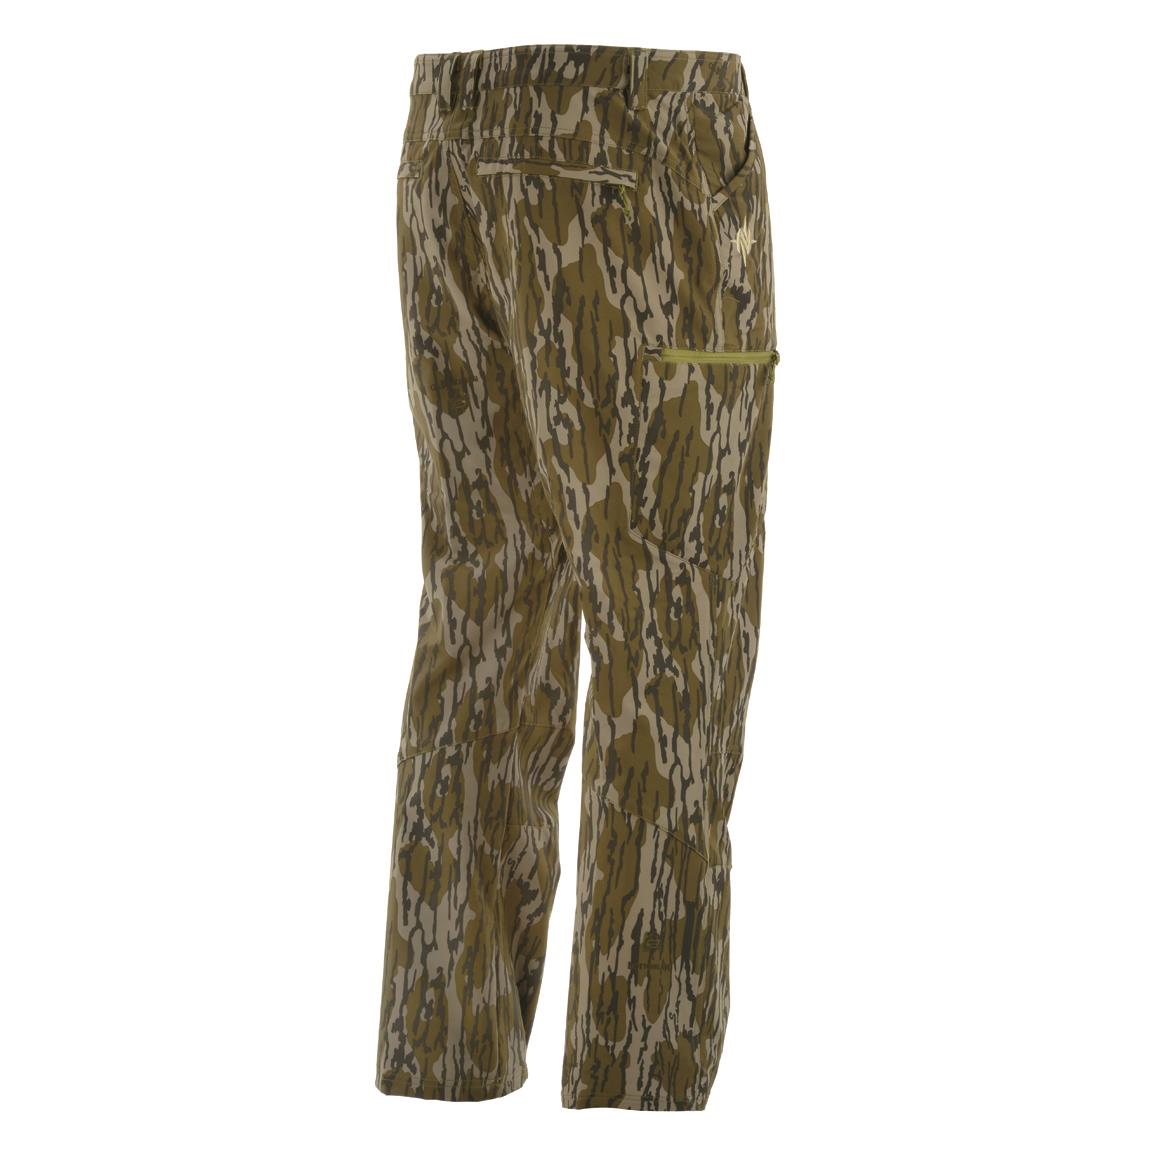 Polyester Hunting Pants | Sportsman's Guide